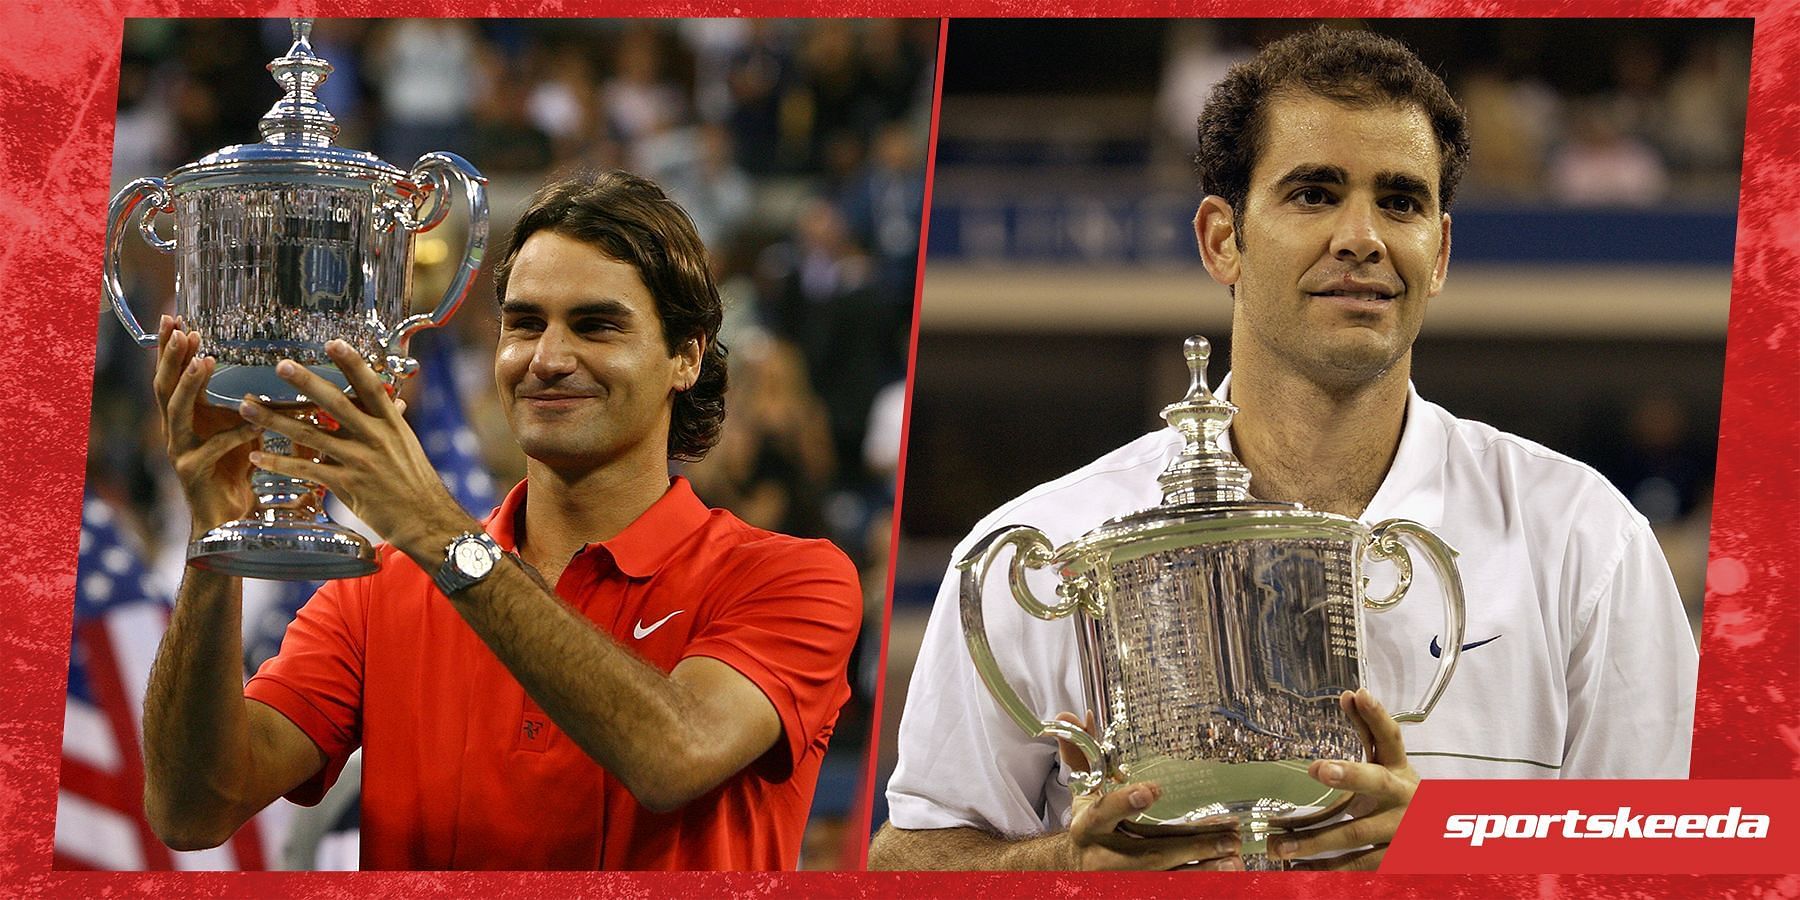 Last 5 players to defend their US Open title ft. Roger Federer &amp; Pete Sampras